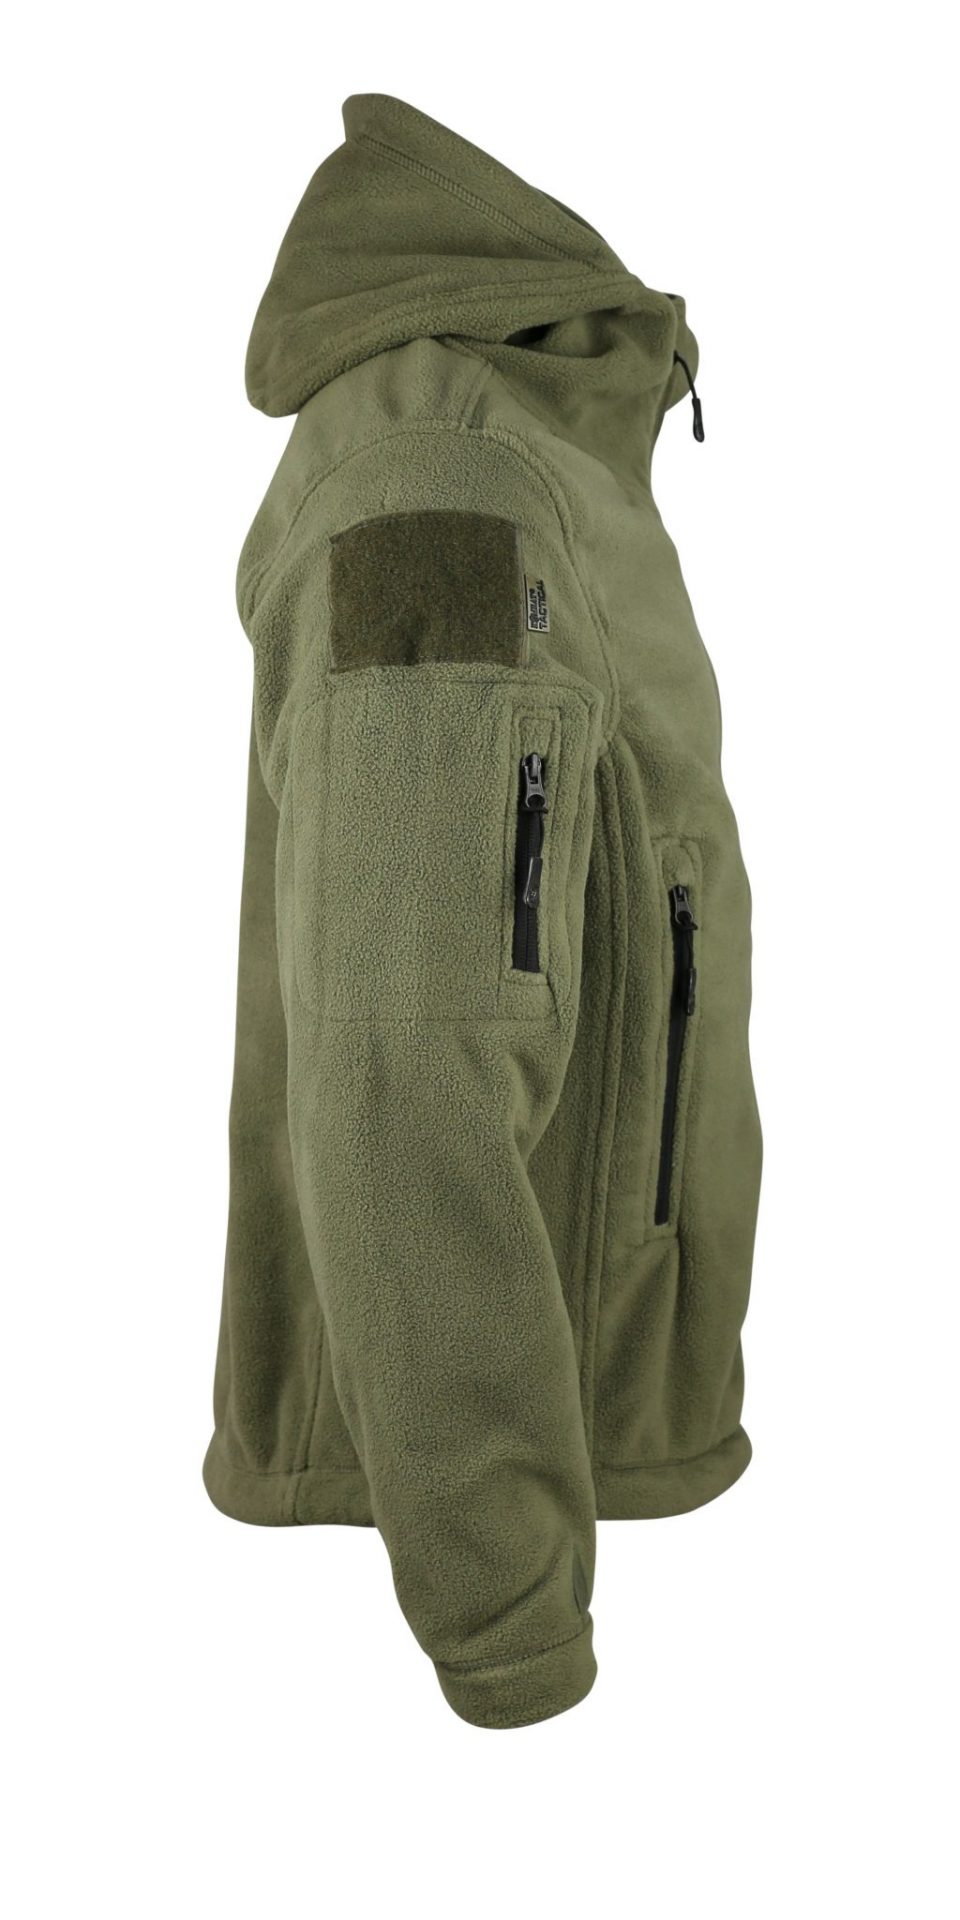 Recon Tactical Hoodie - Olive Green